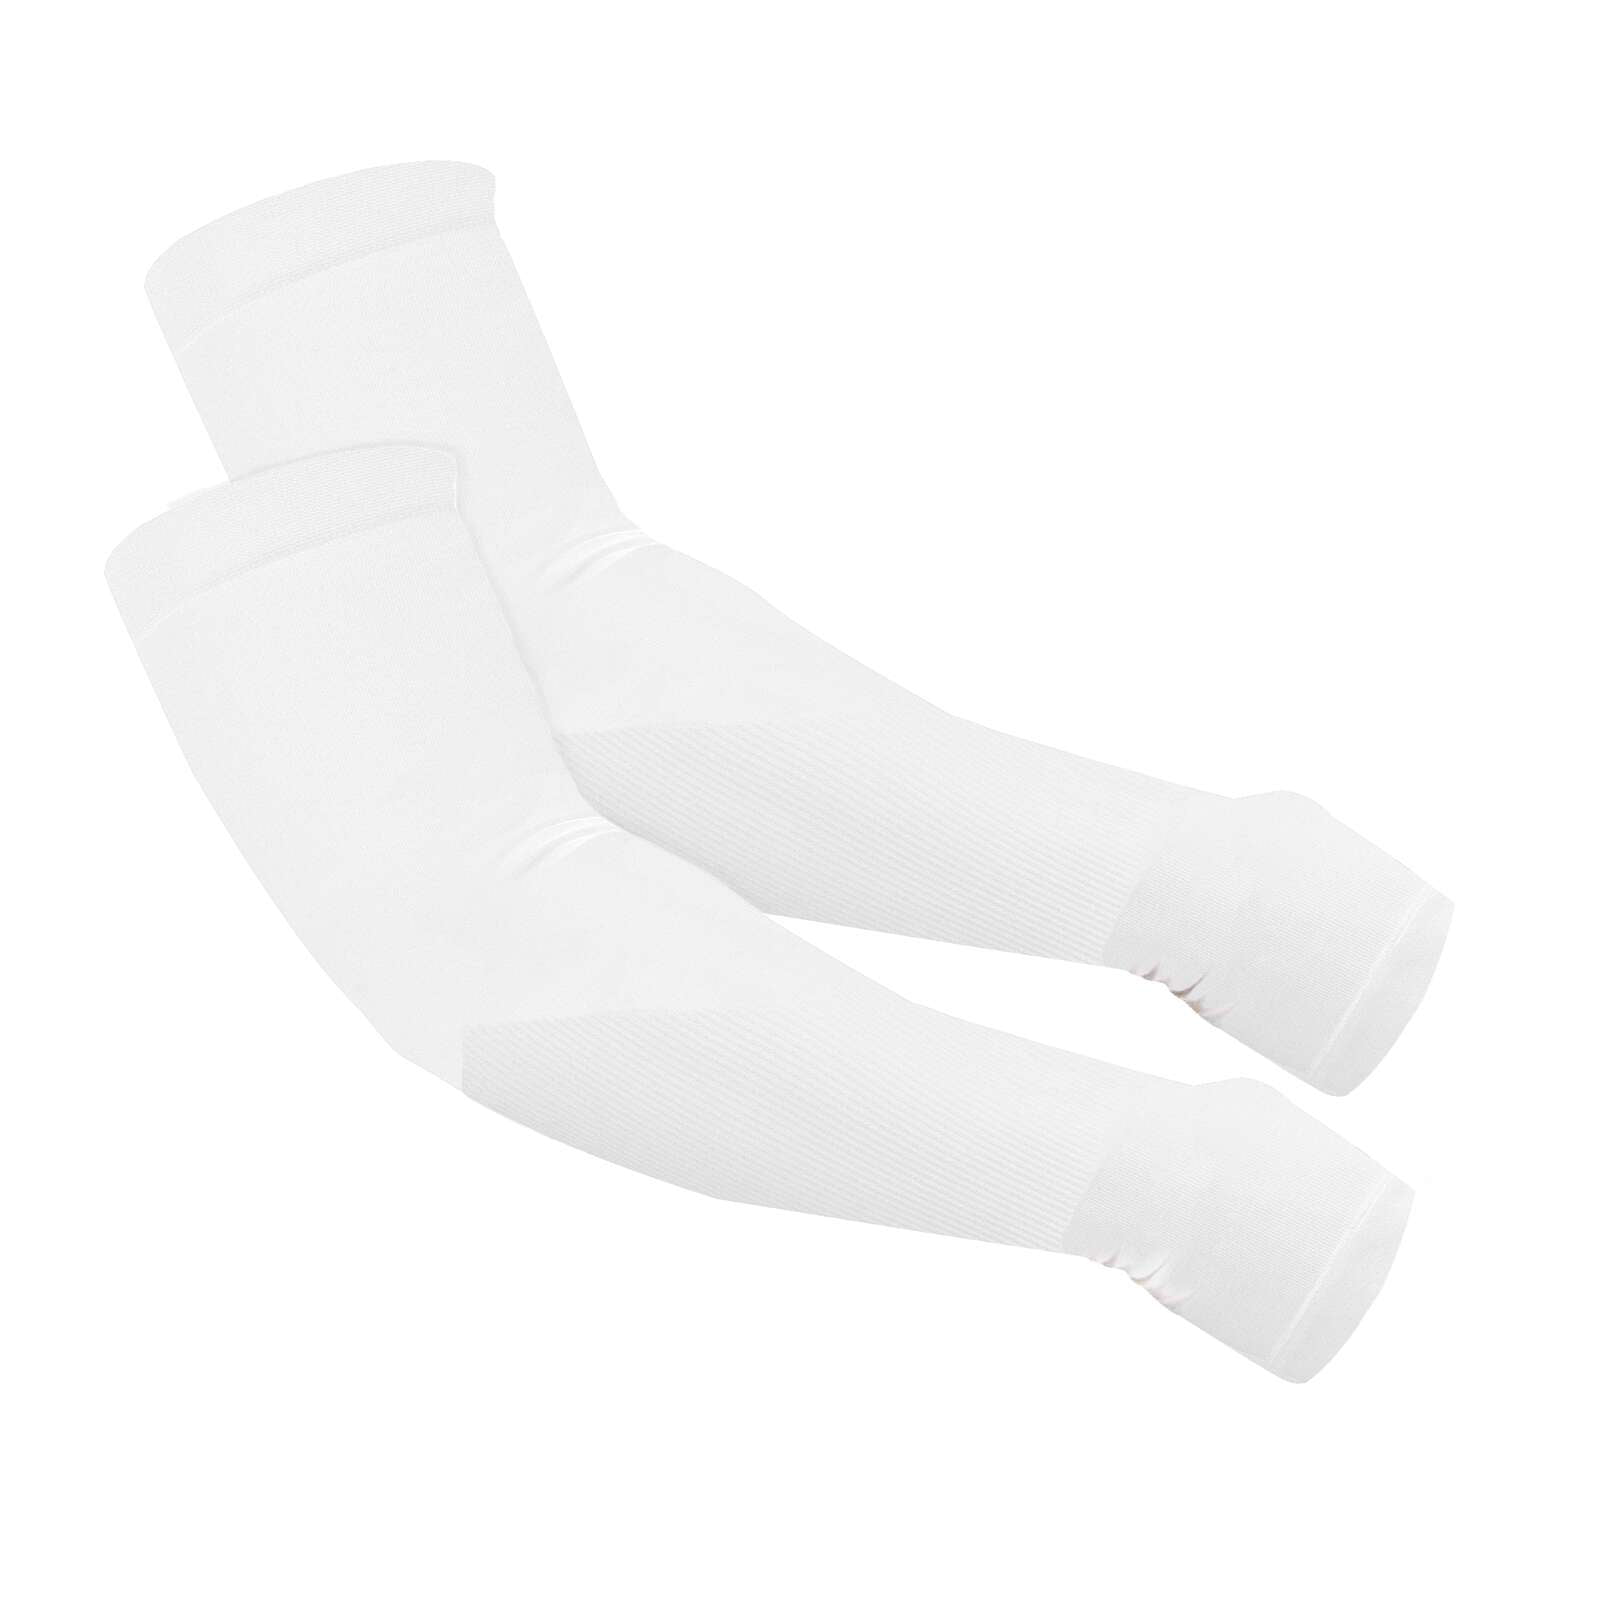  IGNITEX Compression Arm Sleeves - Athlete Sleeves - Sun  Protection Cover Up Sleeves, UV Protection Arm Cover Compression Sleeves :  Sports & Outdoors